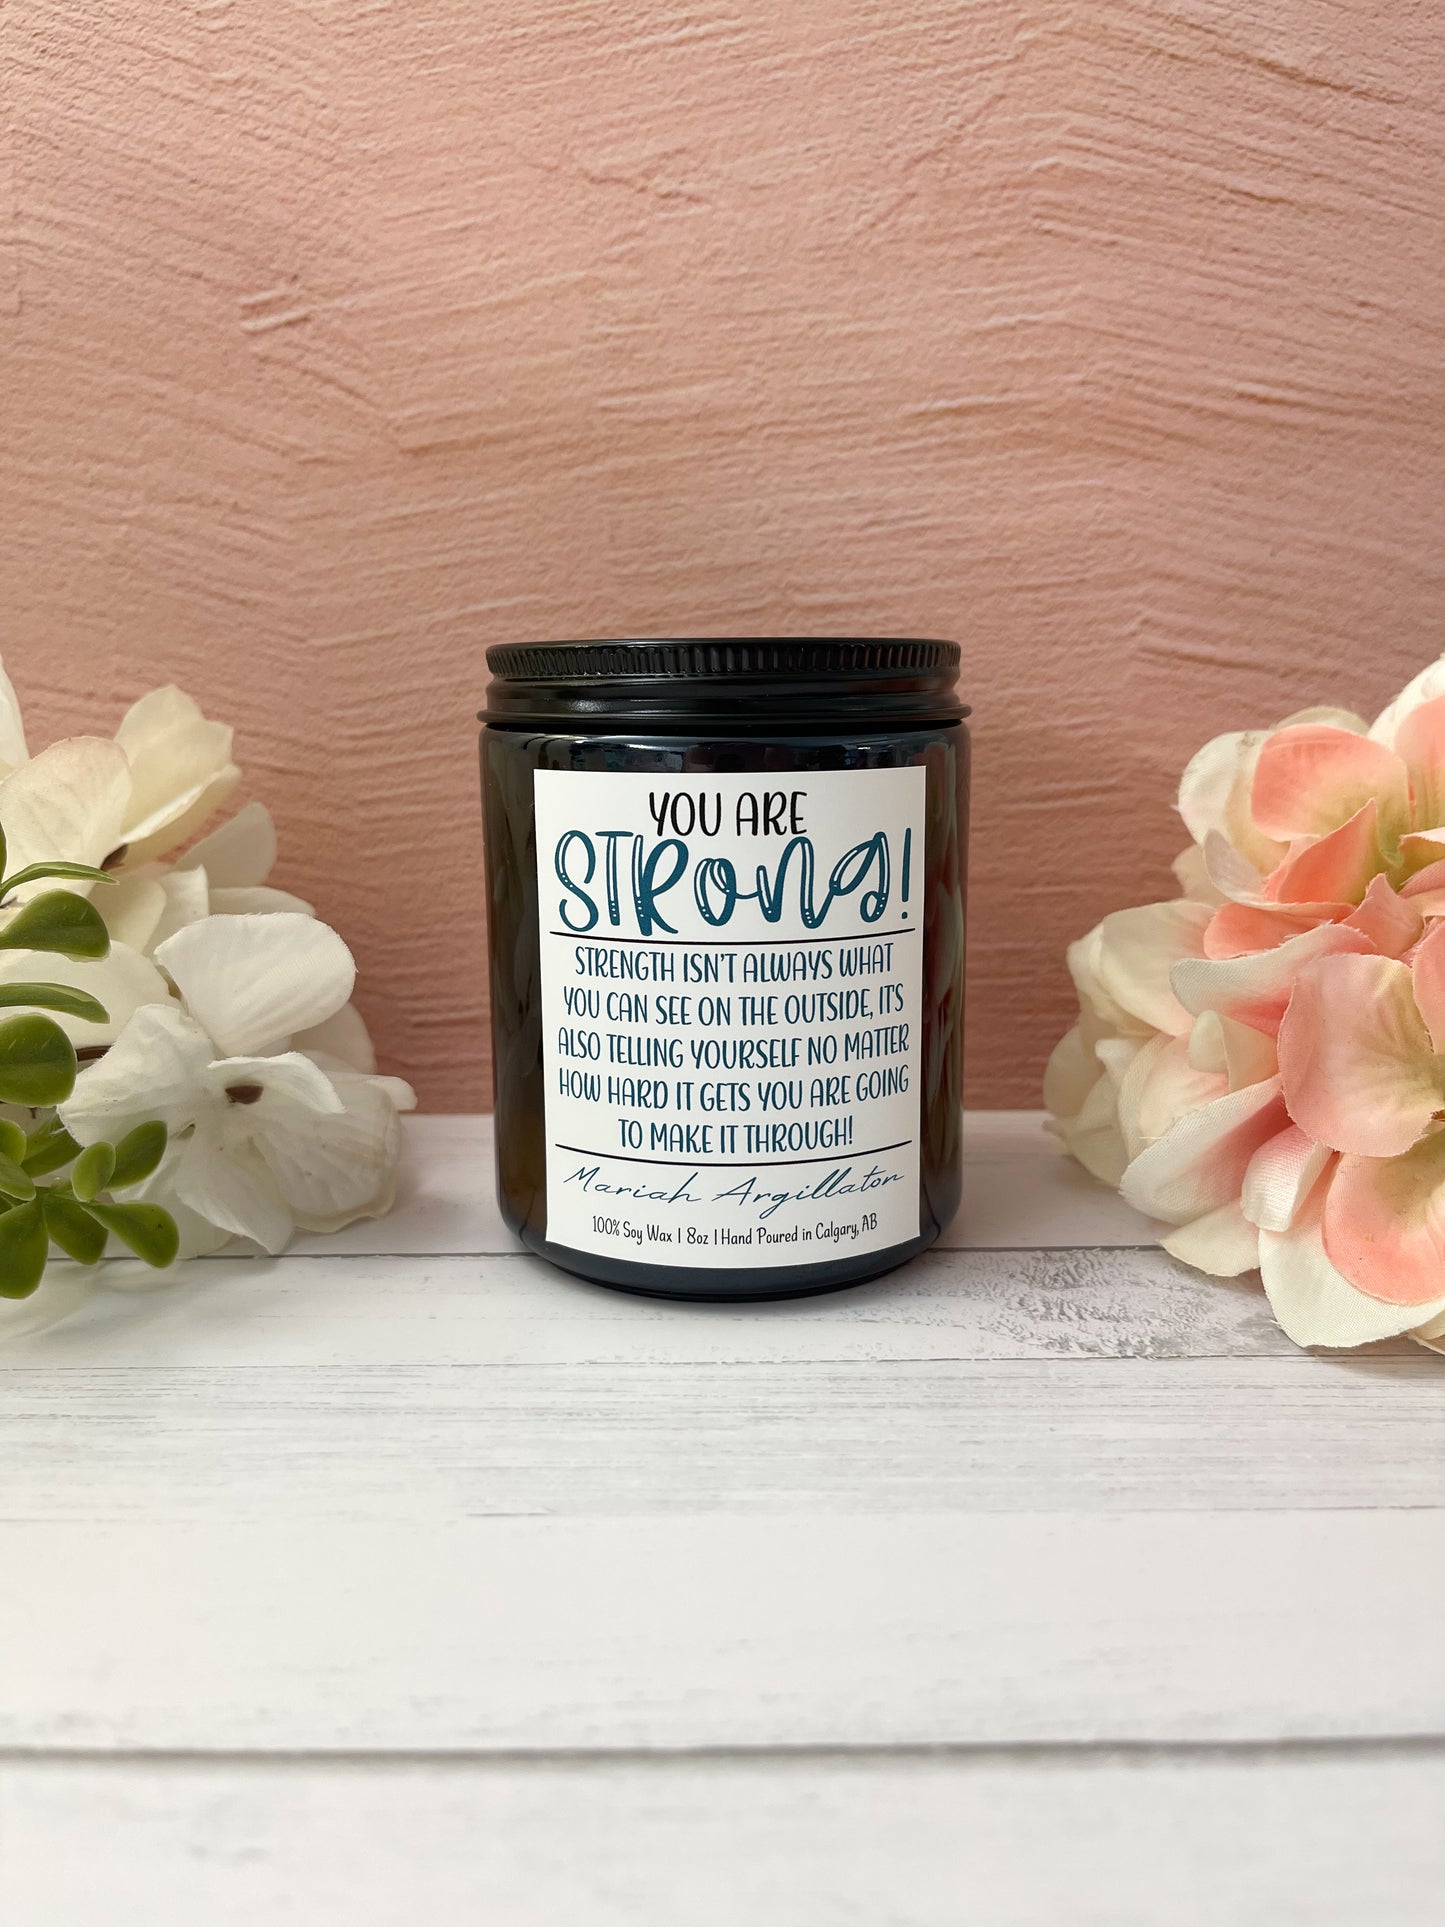 You Are Strong, Coconut Vanilla Candle!